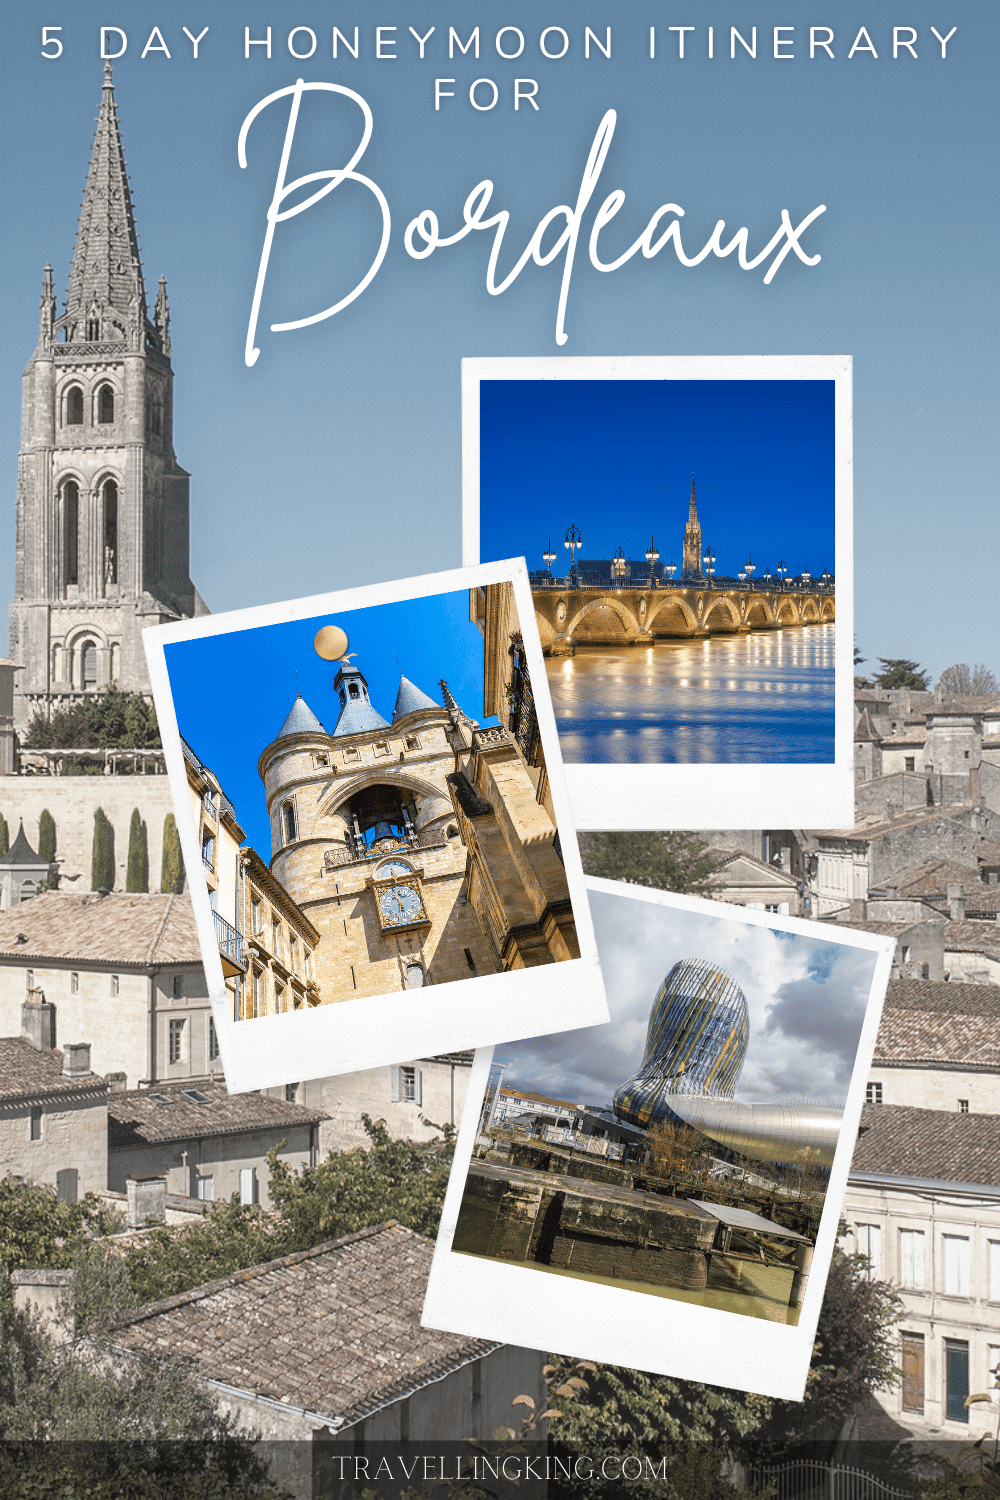 Honeymoon itinerary for Bordeaux - A 5 day Itinerary